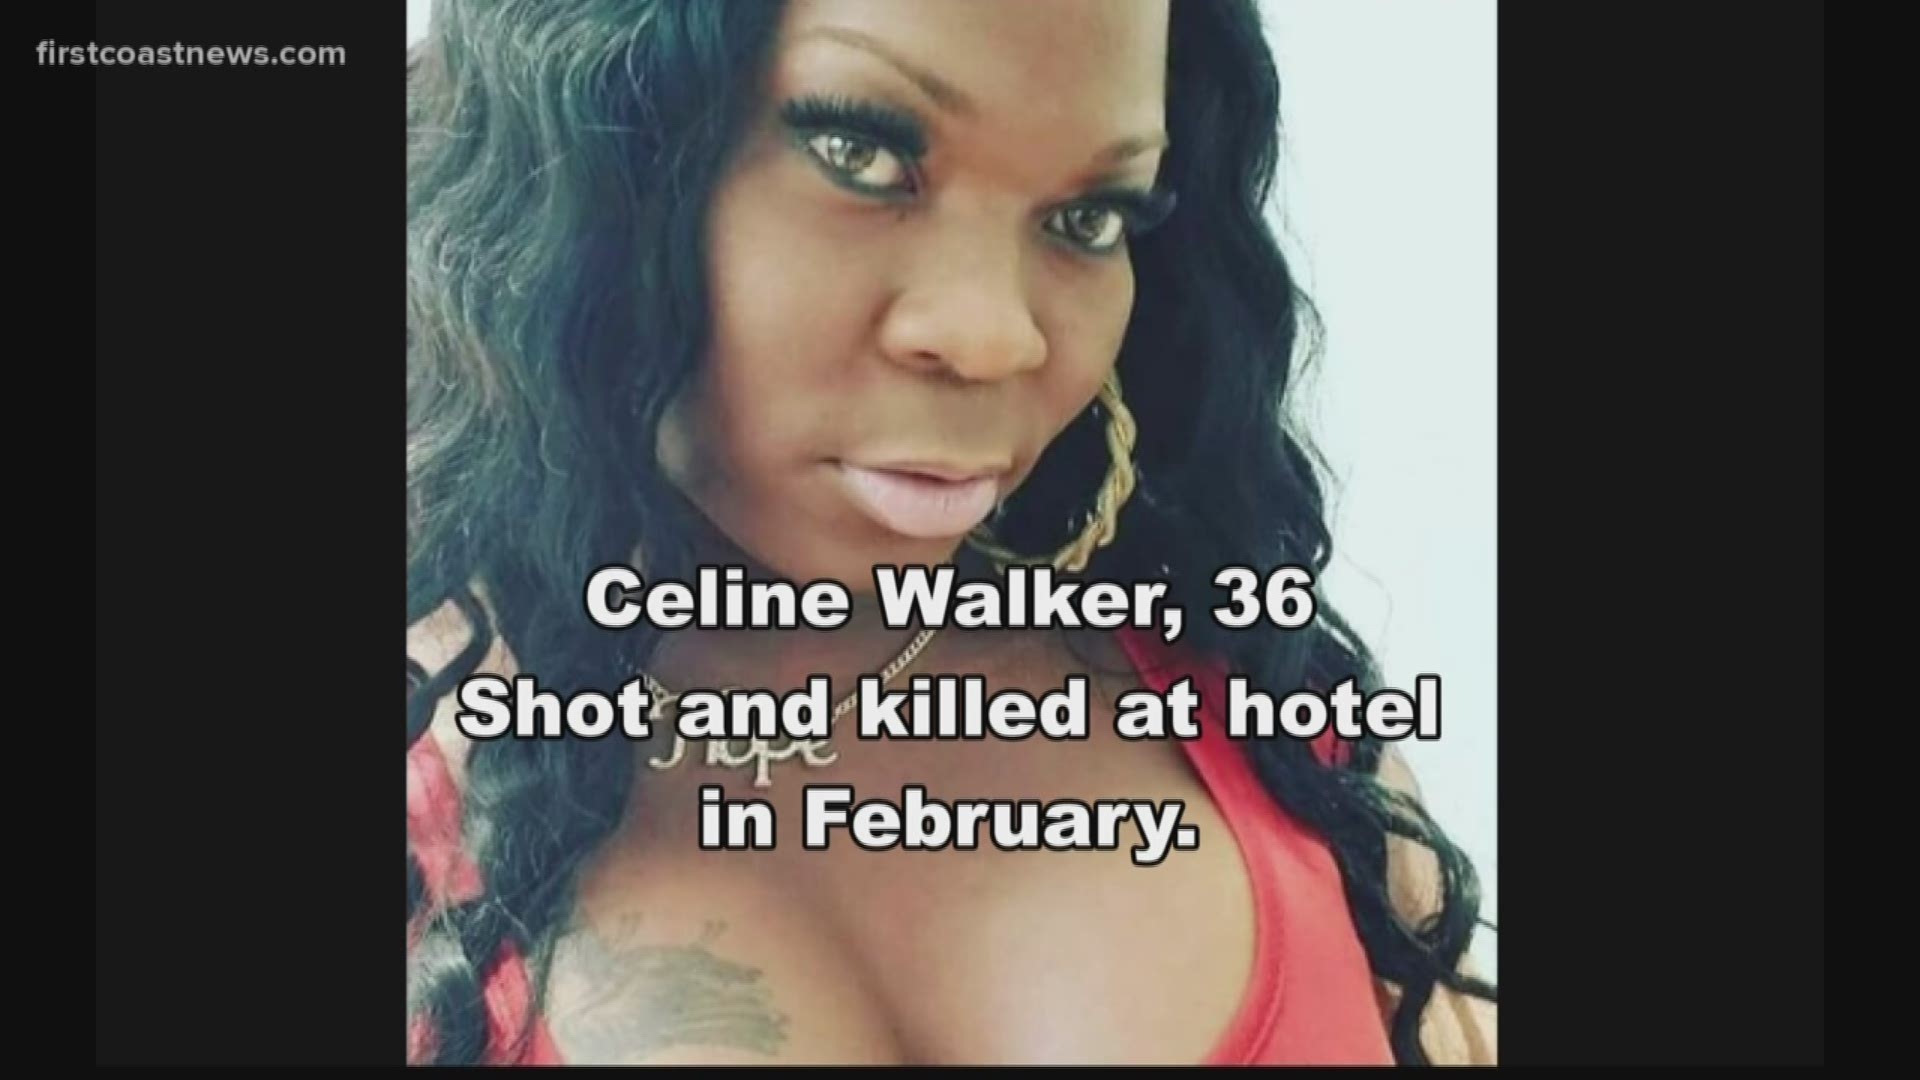 Three of the 13 confirmed transgender homicides of 2018 have occurred in Jacksonville.